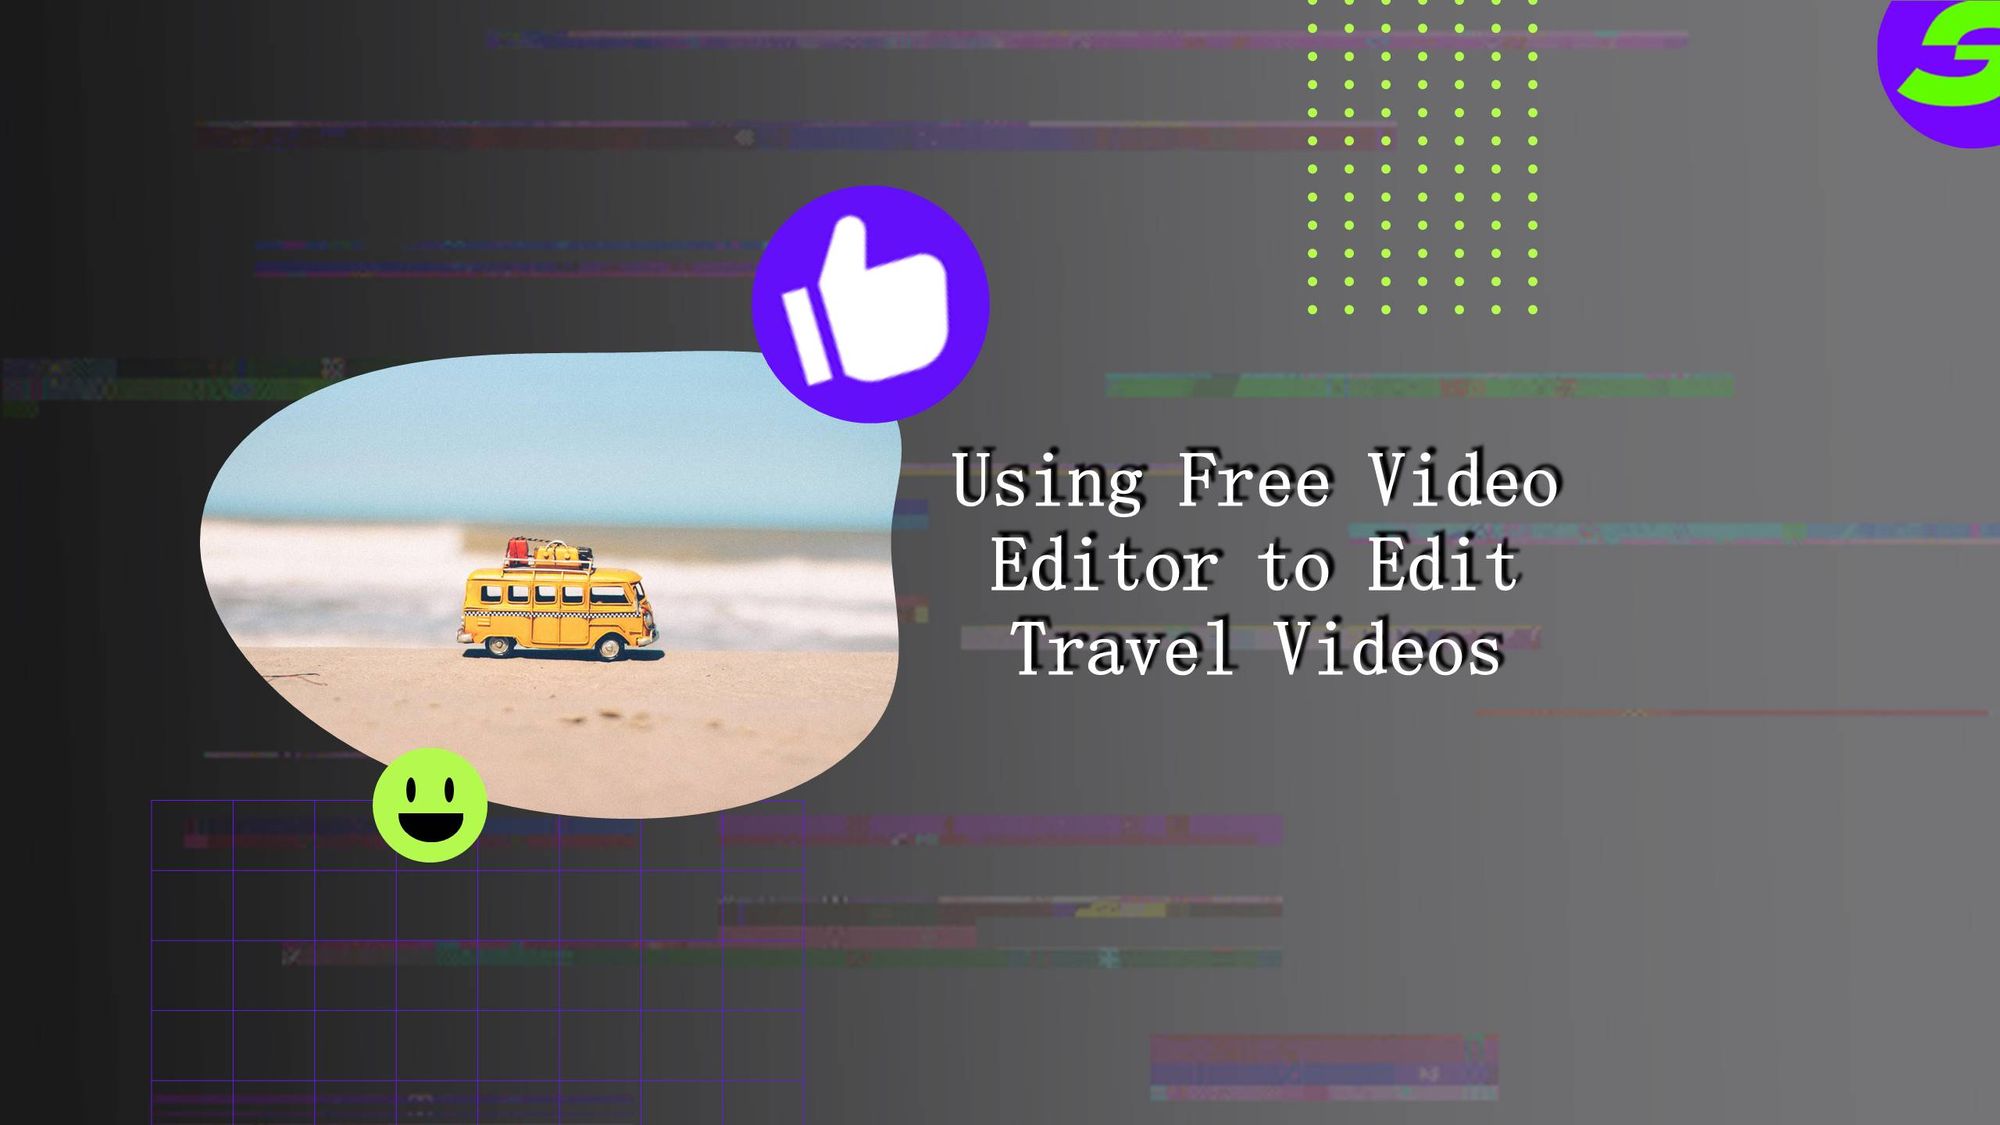 Document your Travel Videos with ShotCut Free Video Editor now!